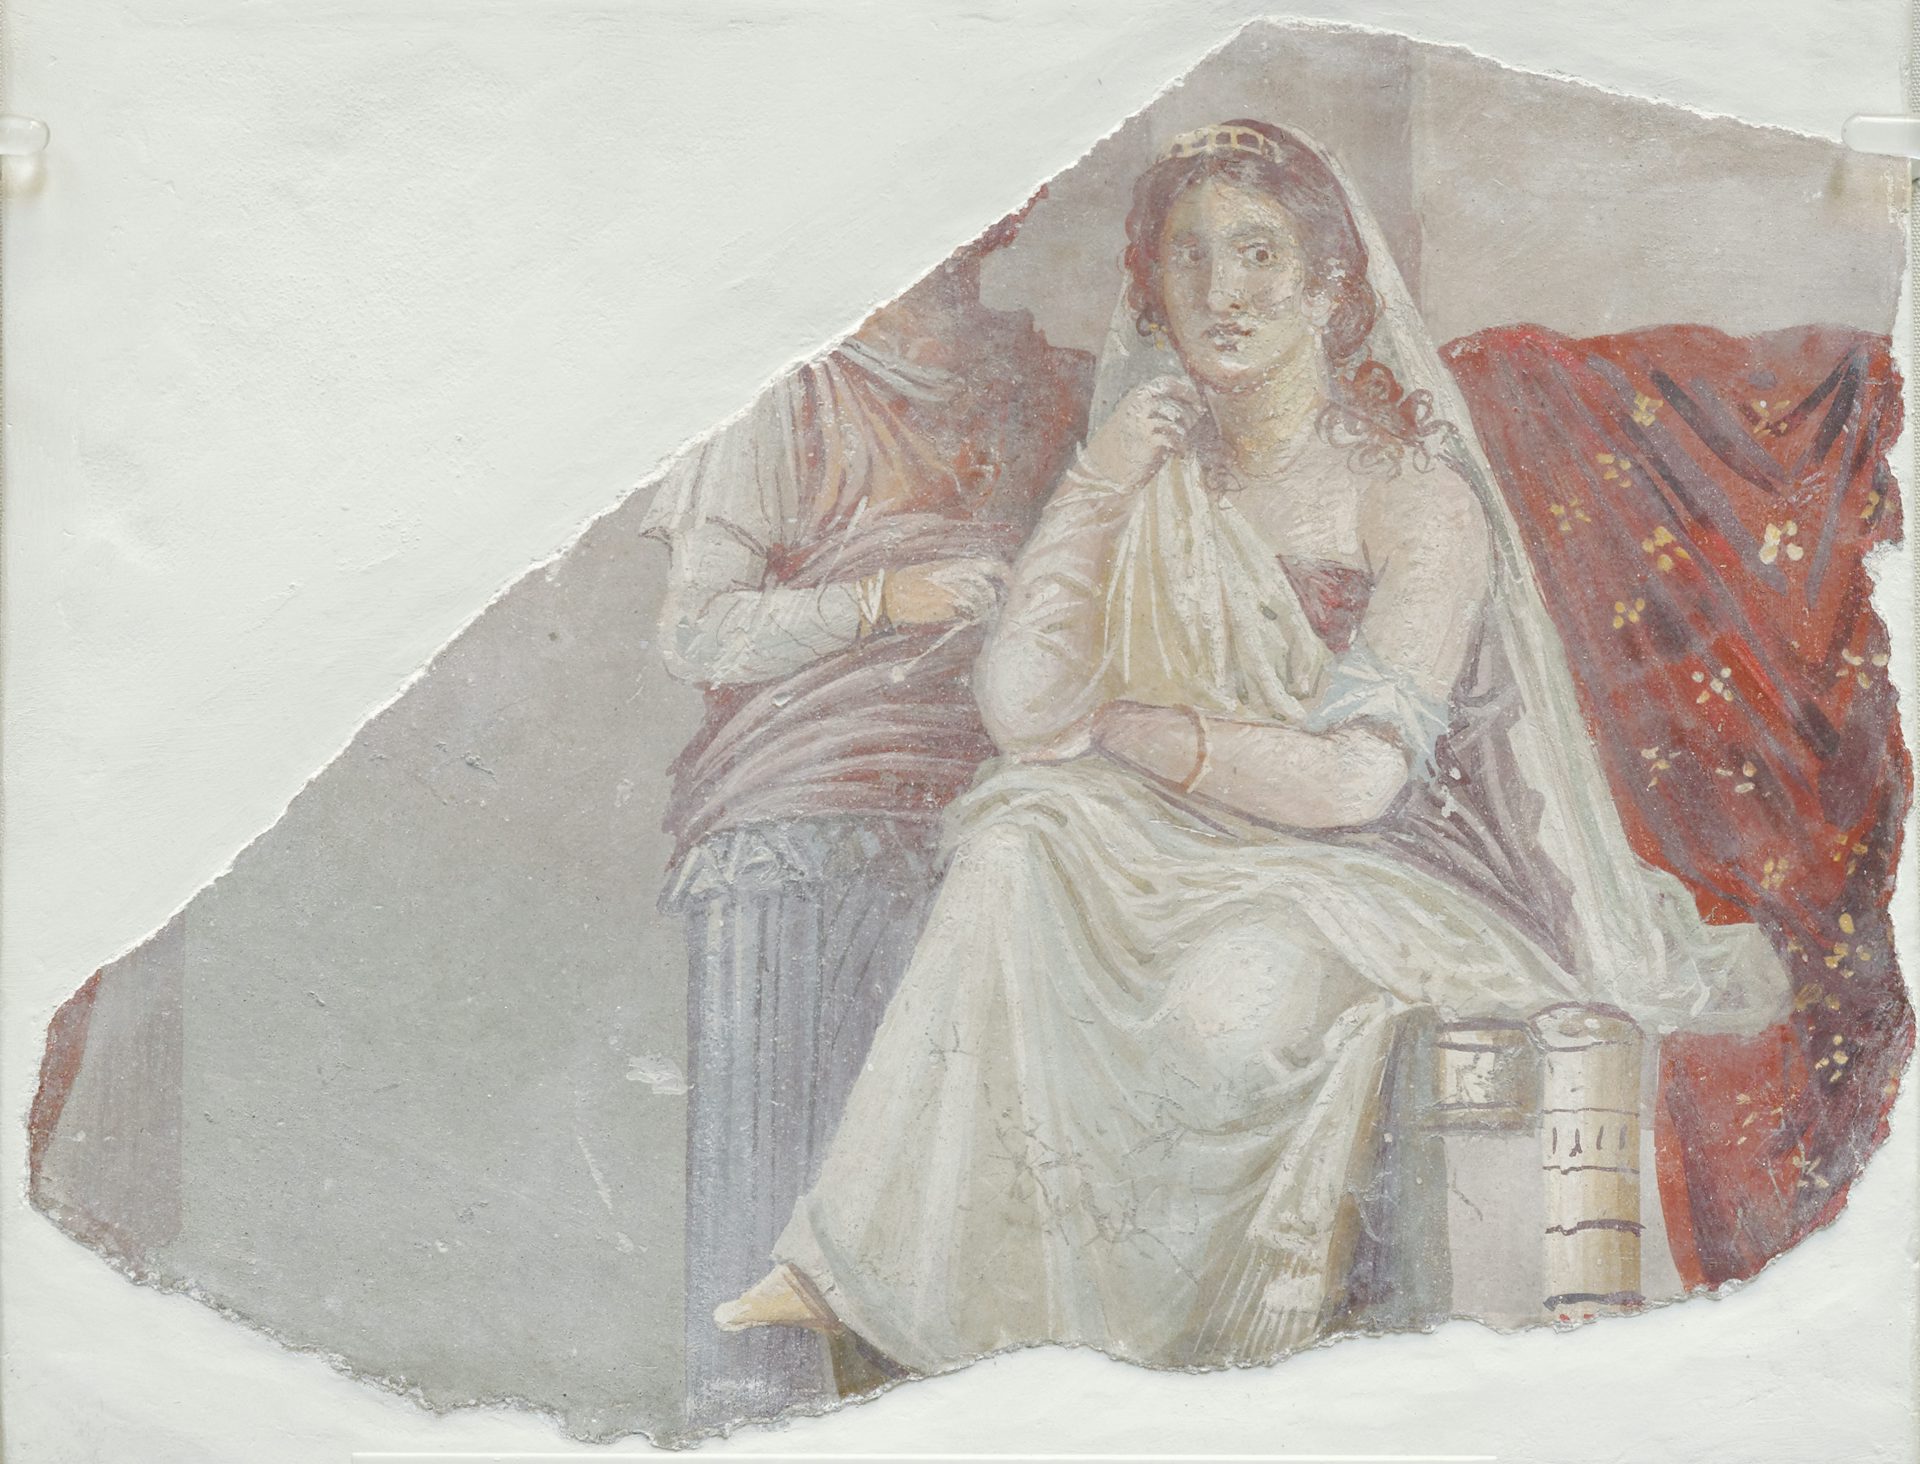 Fresco of Phaedra with an attendant